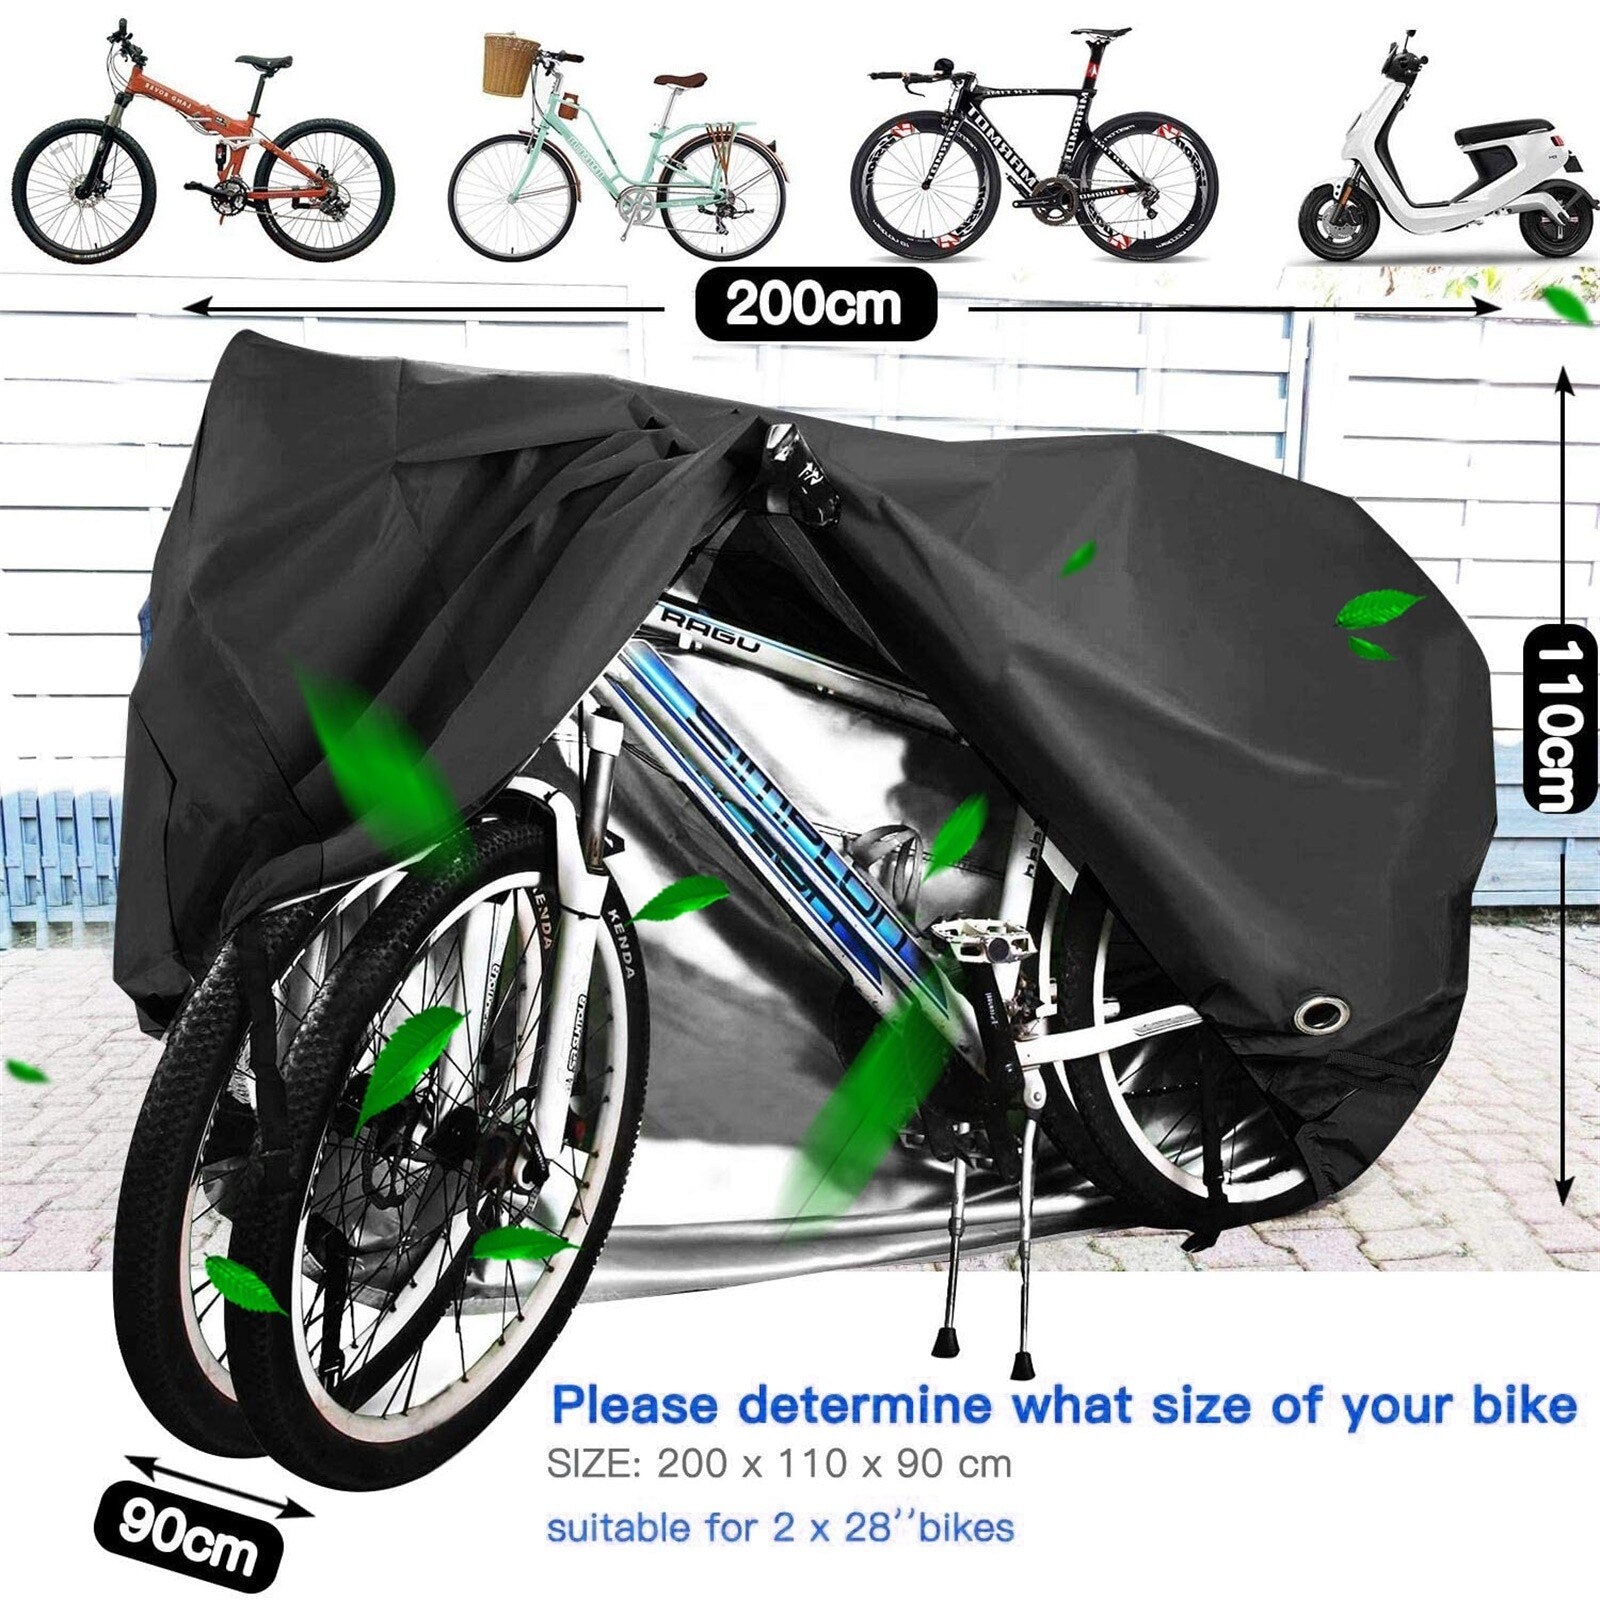 Smabike Bicycle Protective Gear Waterproof Bike Cover Outdoor Sunshade Dustproof Sunshine Cover 2 Bike Outer Cover